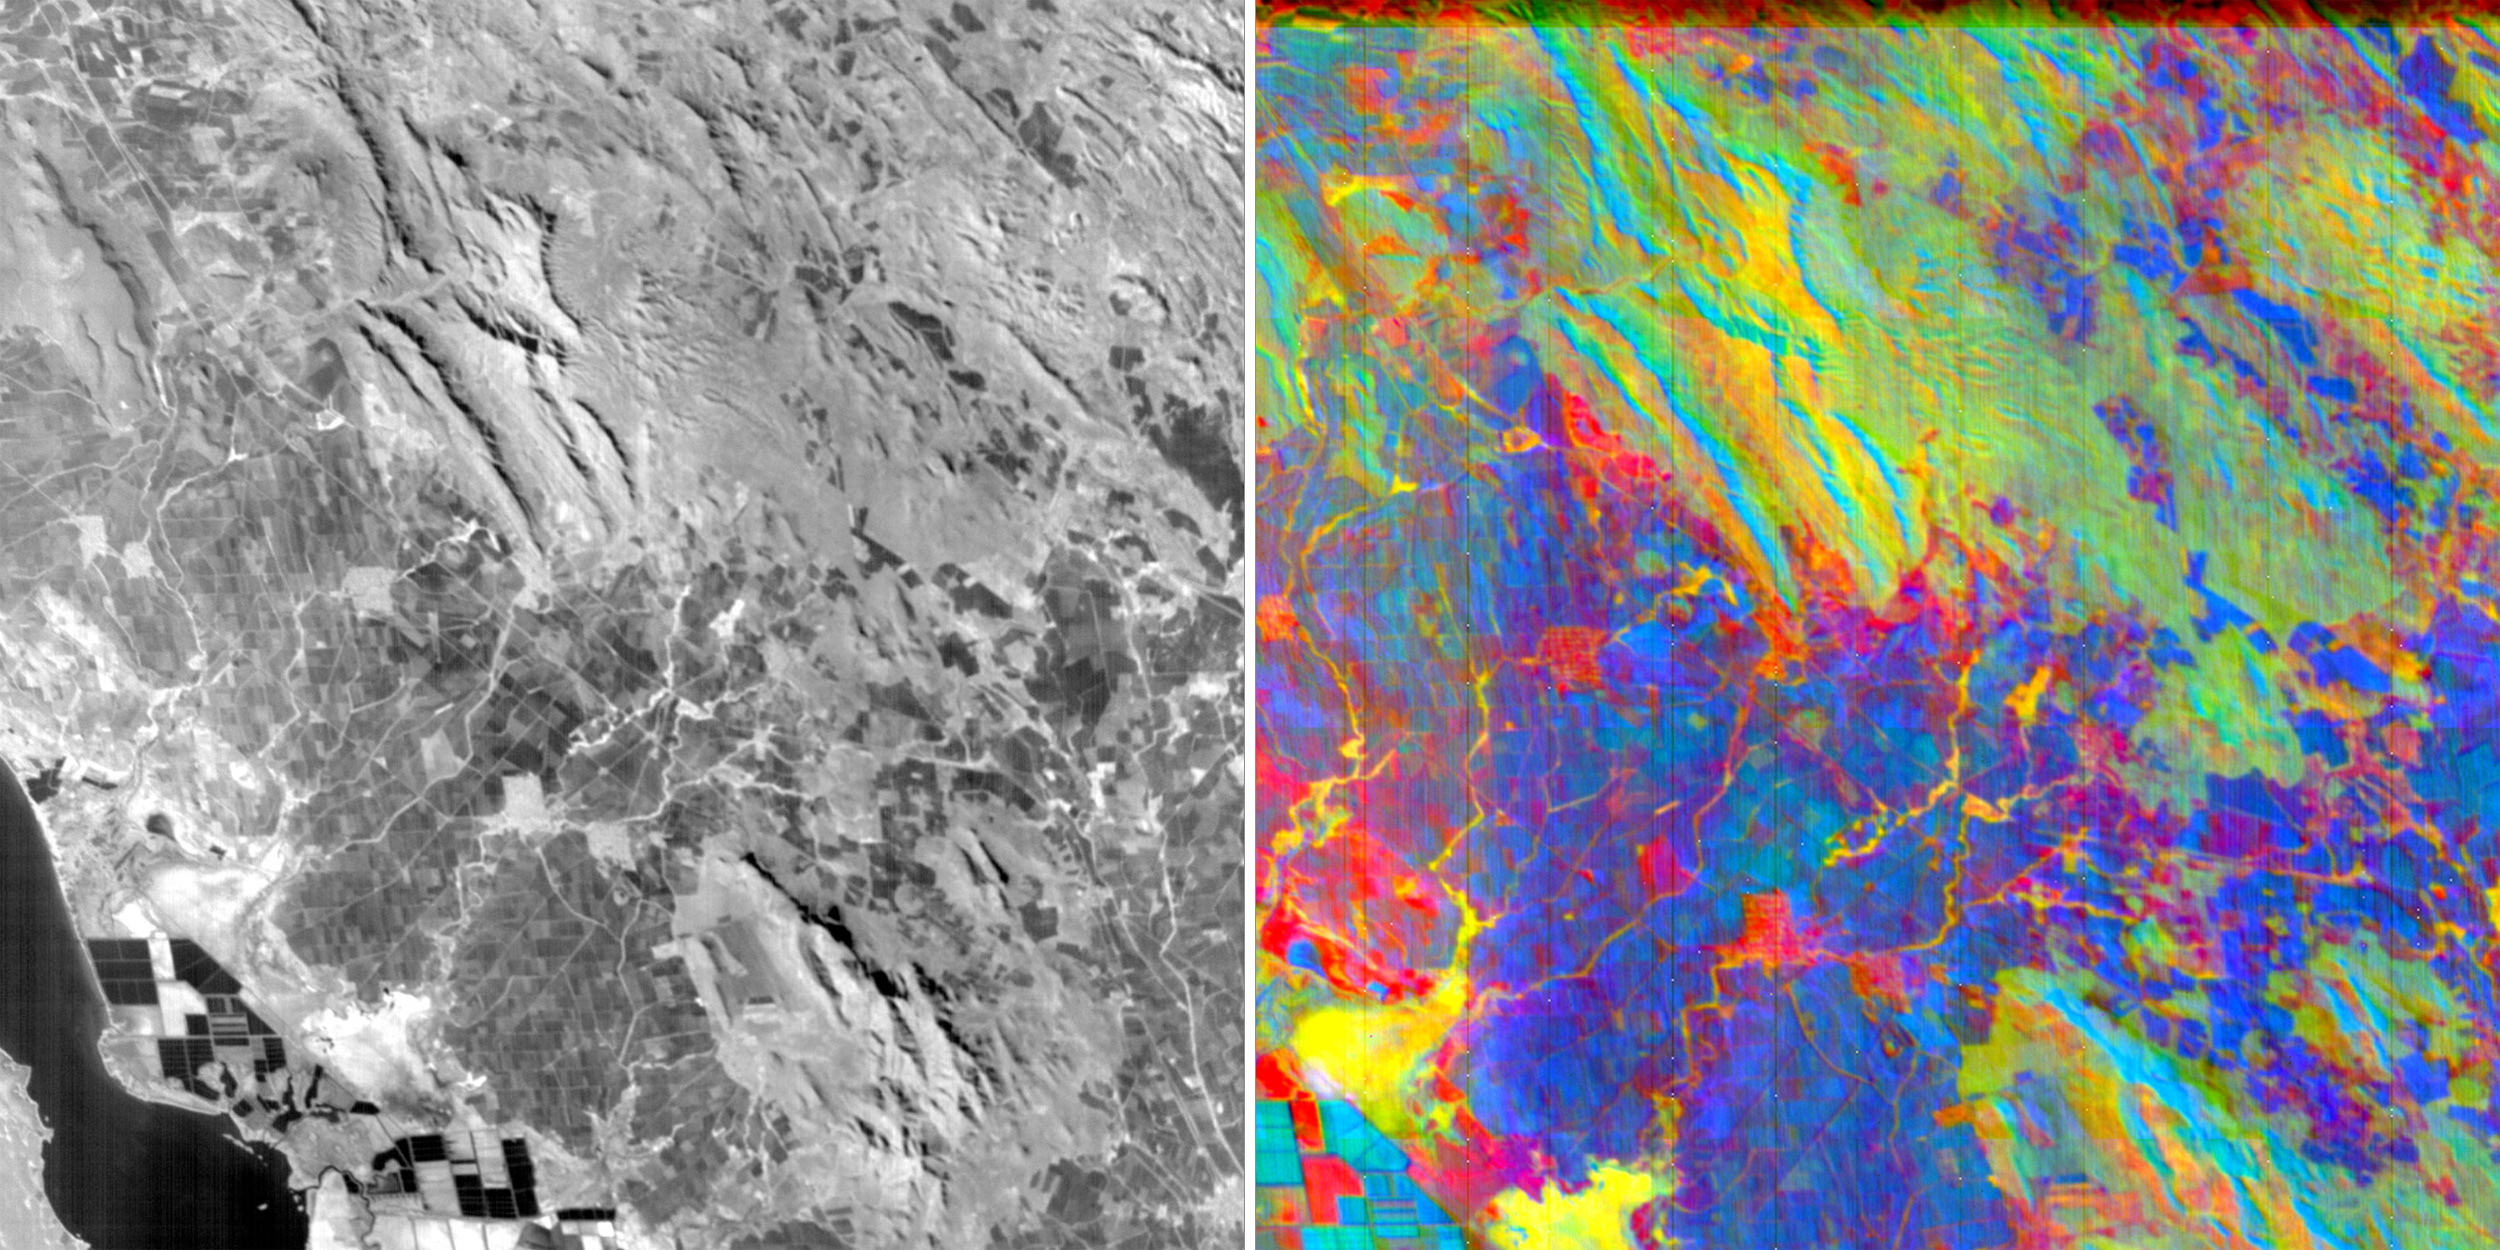 Monochrome image on the left and hyperspectral image on the right of a satellite view of the mountains.